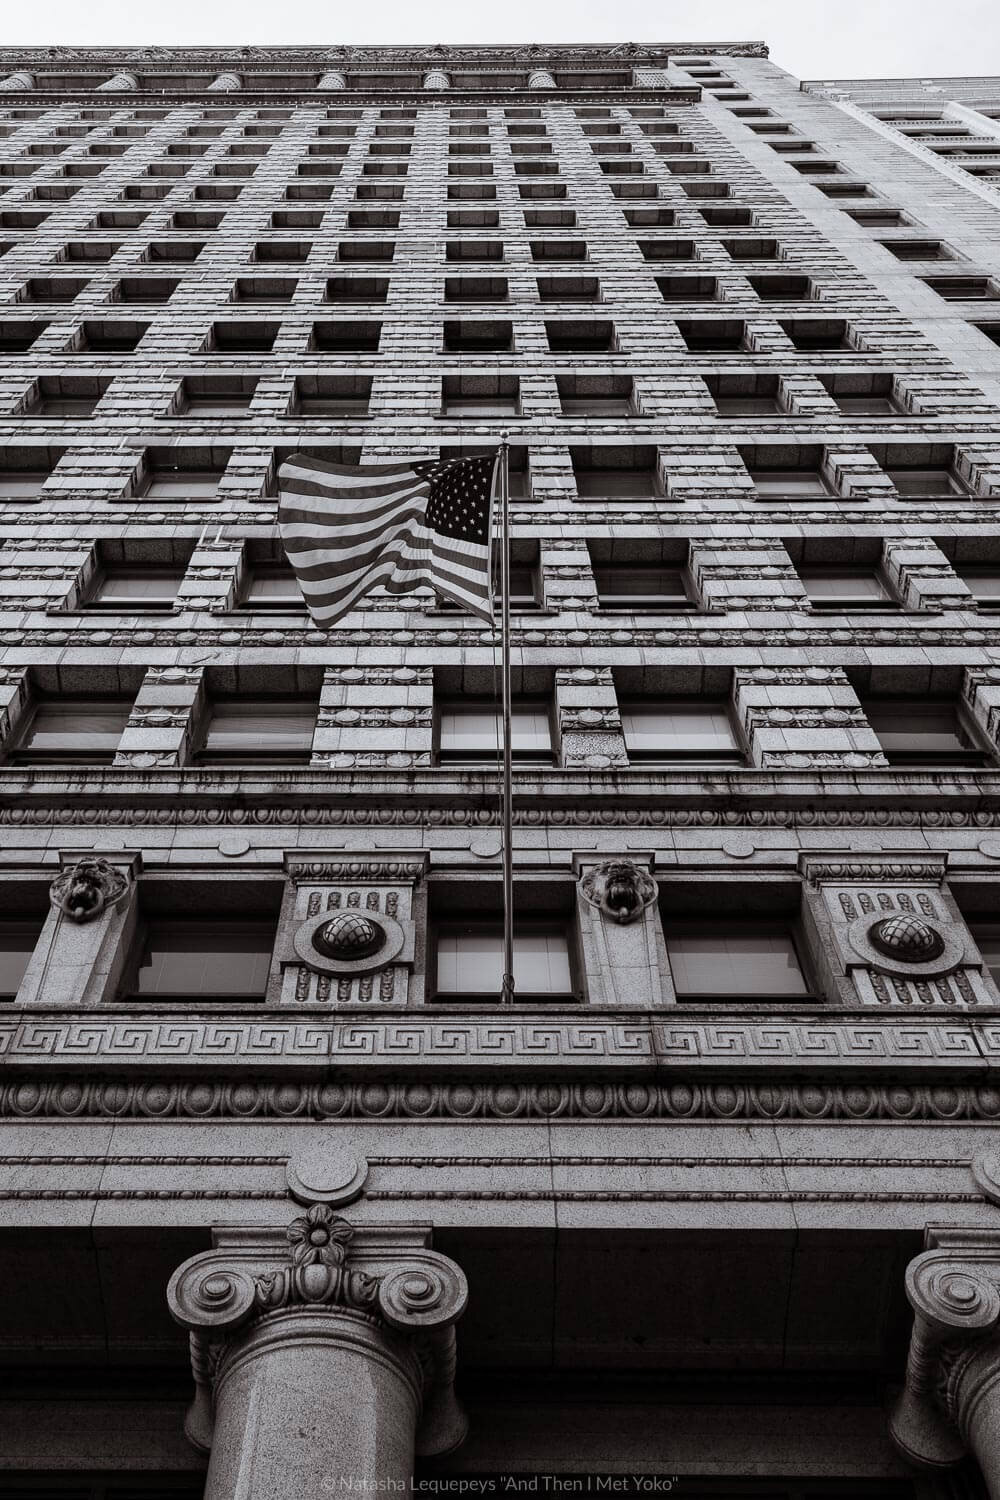 Chicago architecture, USA. Travel photography and guide by © Natasha Lequepeys for "And Then I Met Yoko". #chicago #usa #travelblog #travelphotography